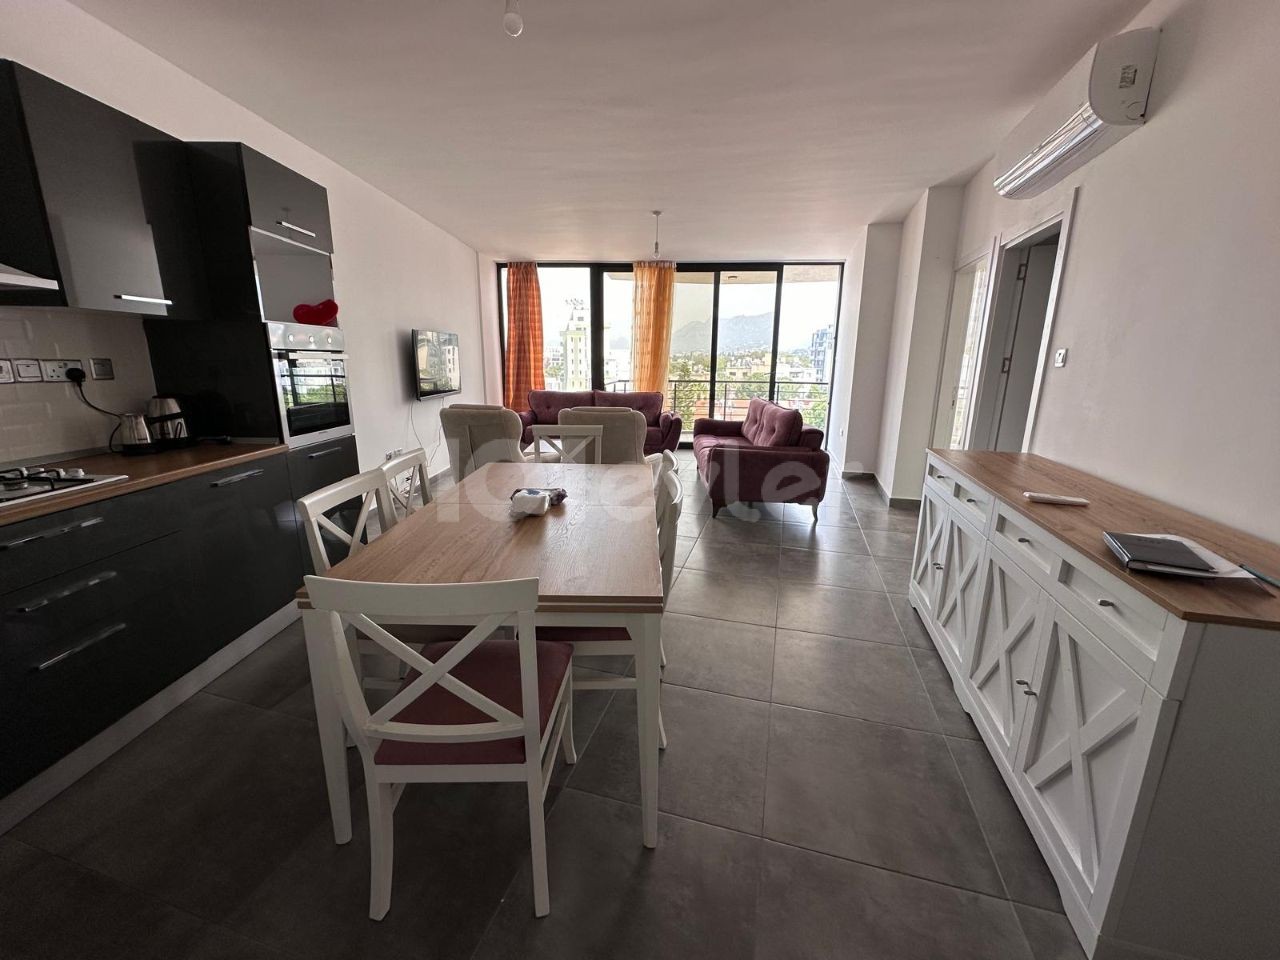 2+1 FULLY FURNISHED FLAT FOR RENT IN KYRENIA, WITH MOUNTAIN AND SEA VIEWS.